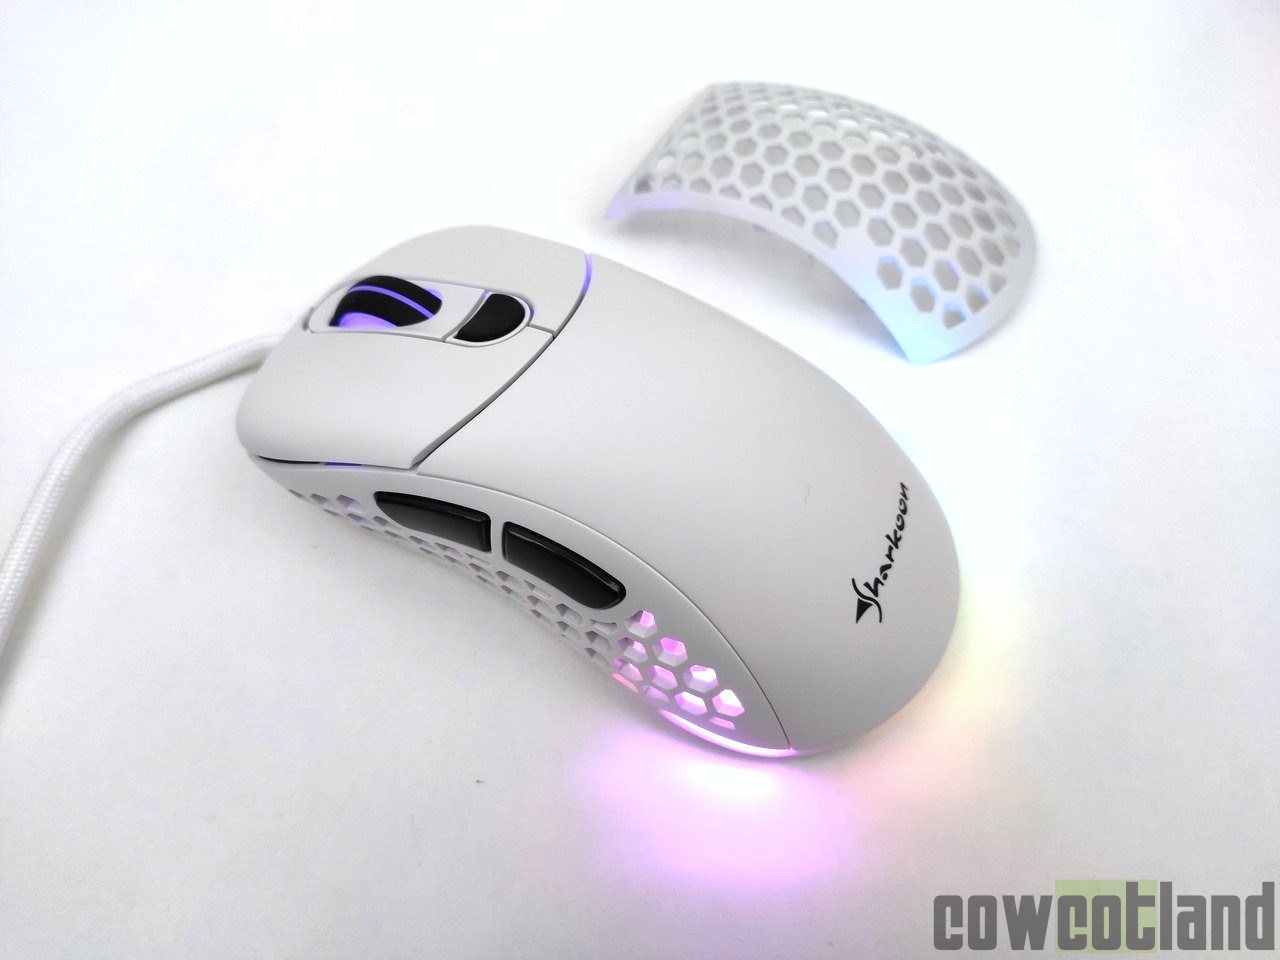 Image 43519, galerie Test souris Gaming Sharkoon Light 200 : Zowie-Killer ?